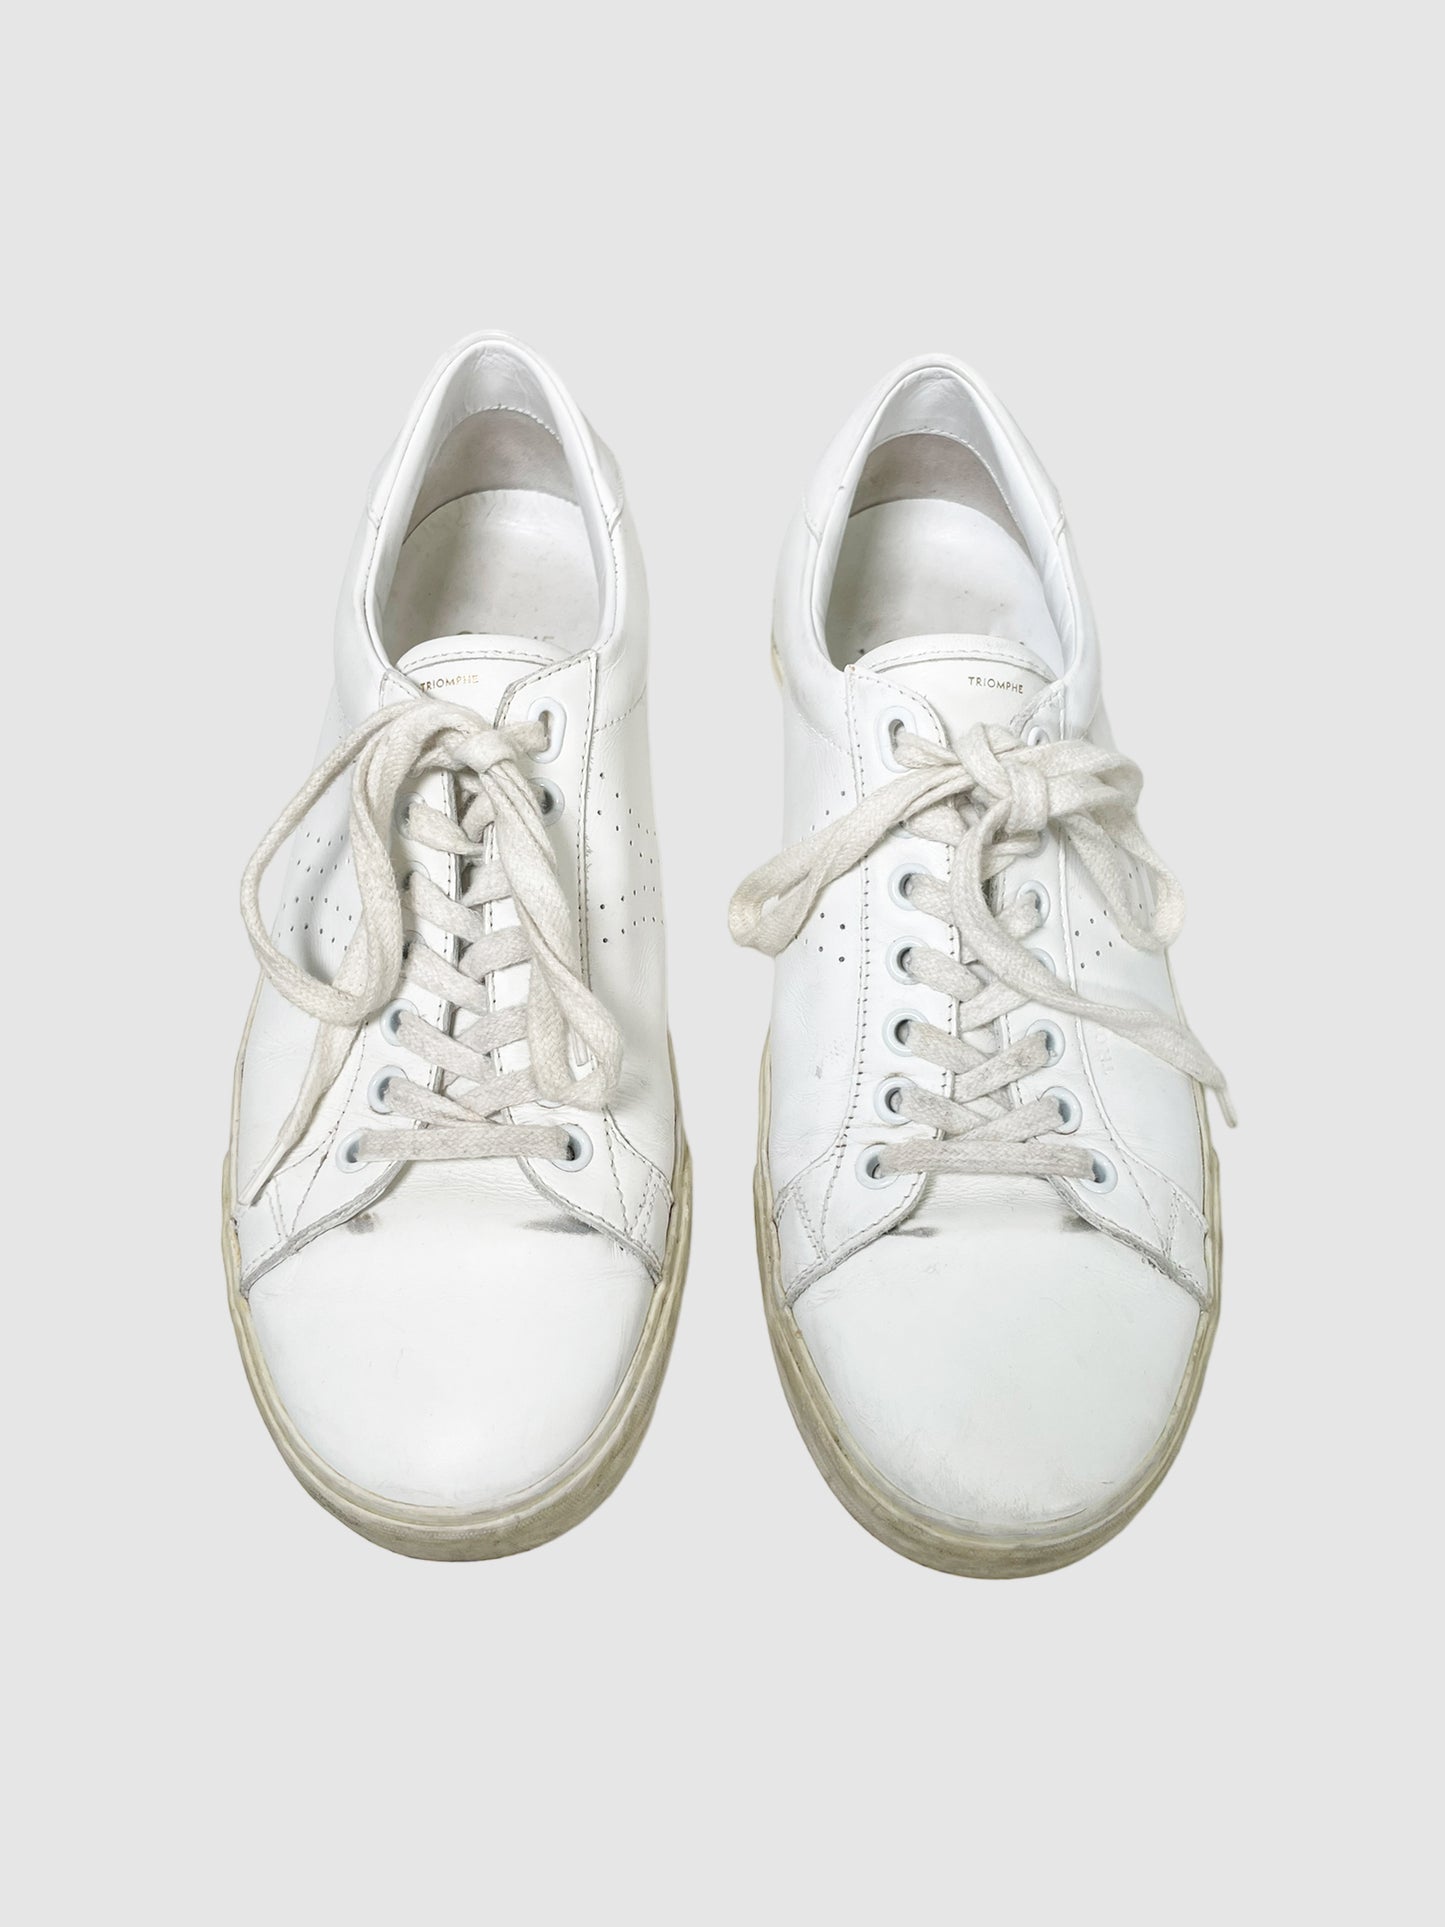 Celine 'Triomphe' Leather Sneakers - Size 39